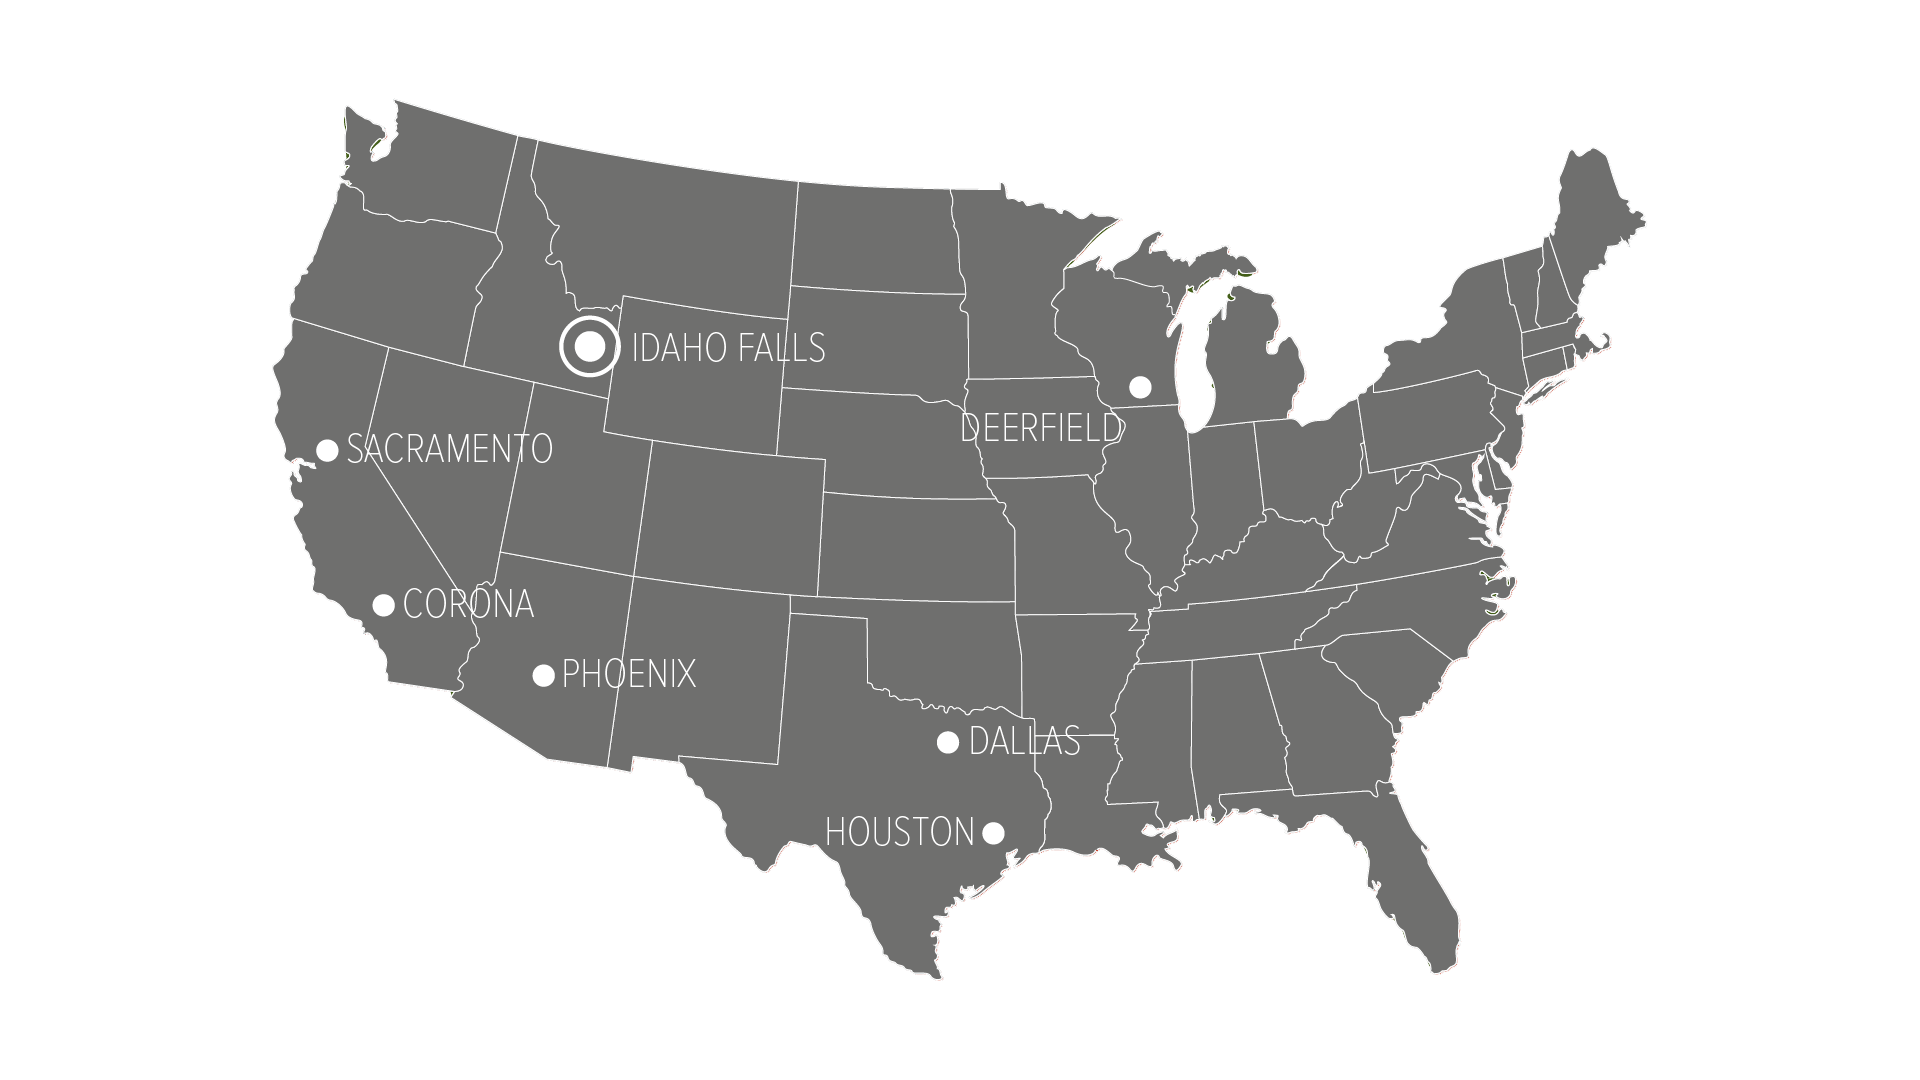 United States map showing Sony coverage